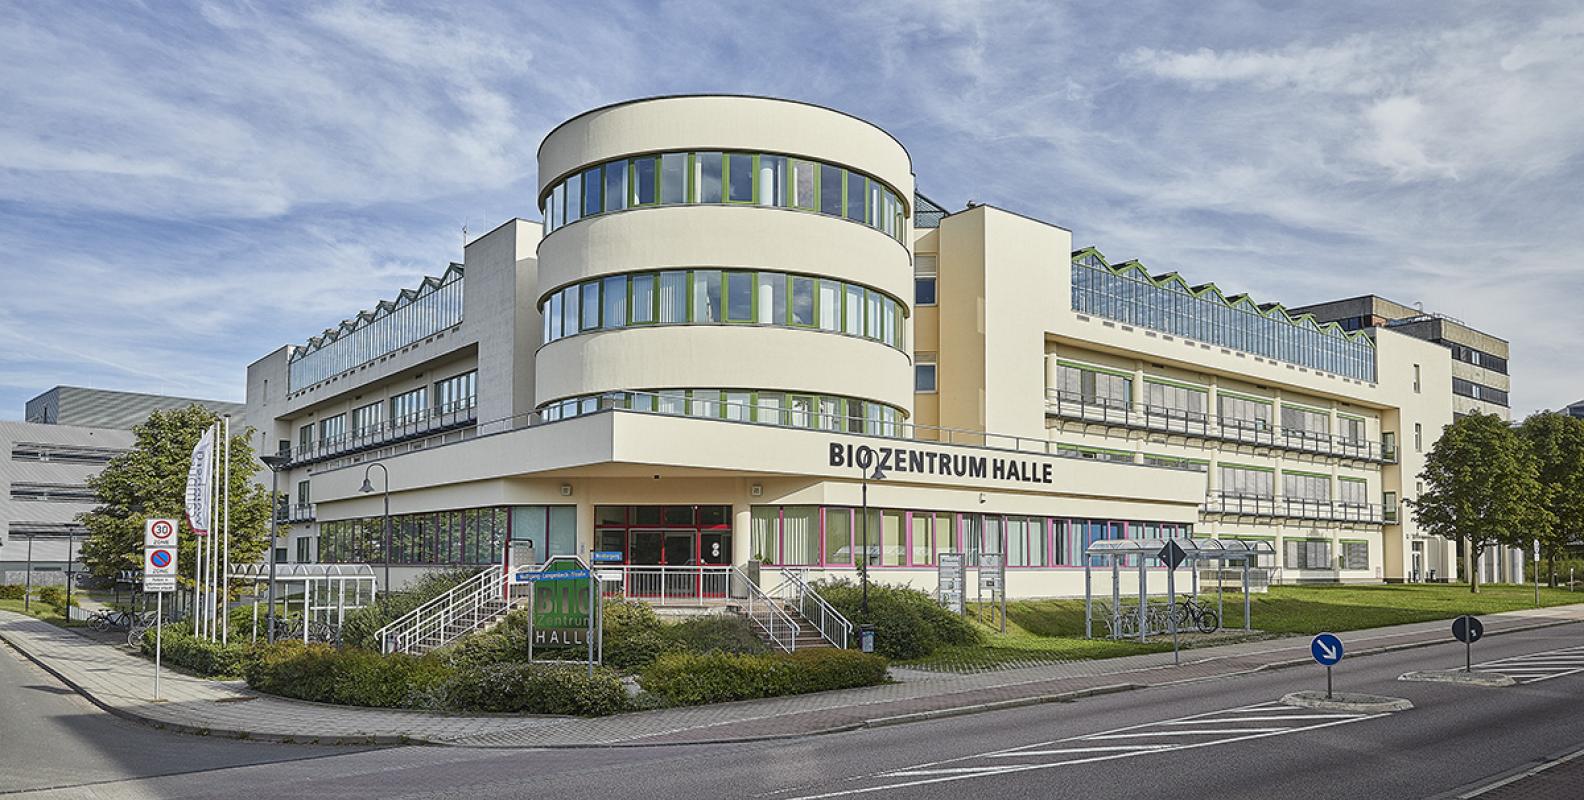 On the road with the 9 euro ticket. Part 5: Halle is a centre for biochemistry and home to the University of Universities